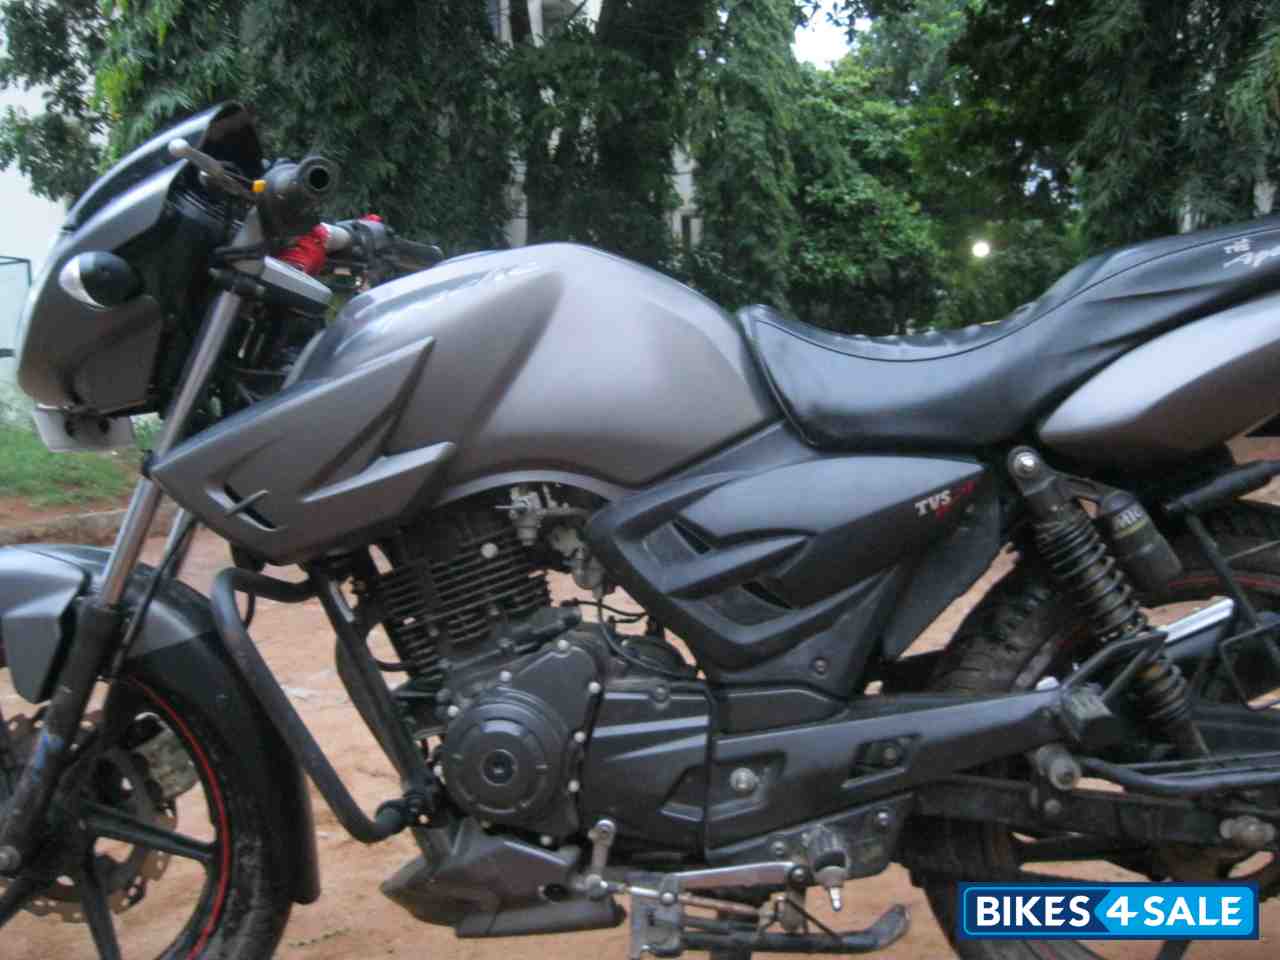 Used 2010 Model Tvs Apache Rtr 160 For Sale In Bangalore Id